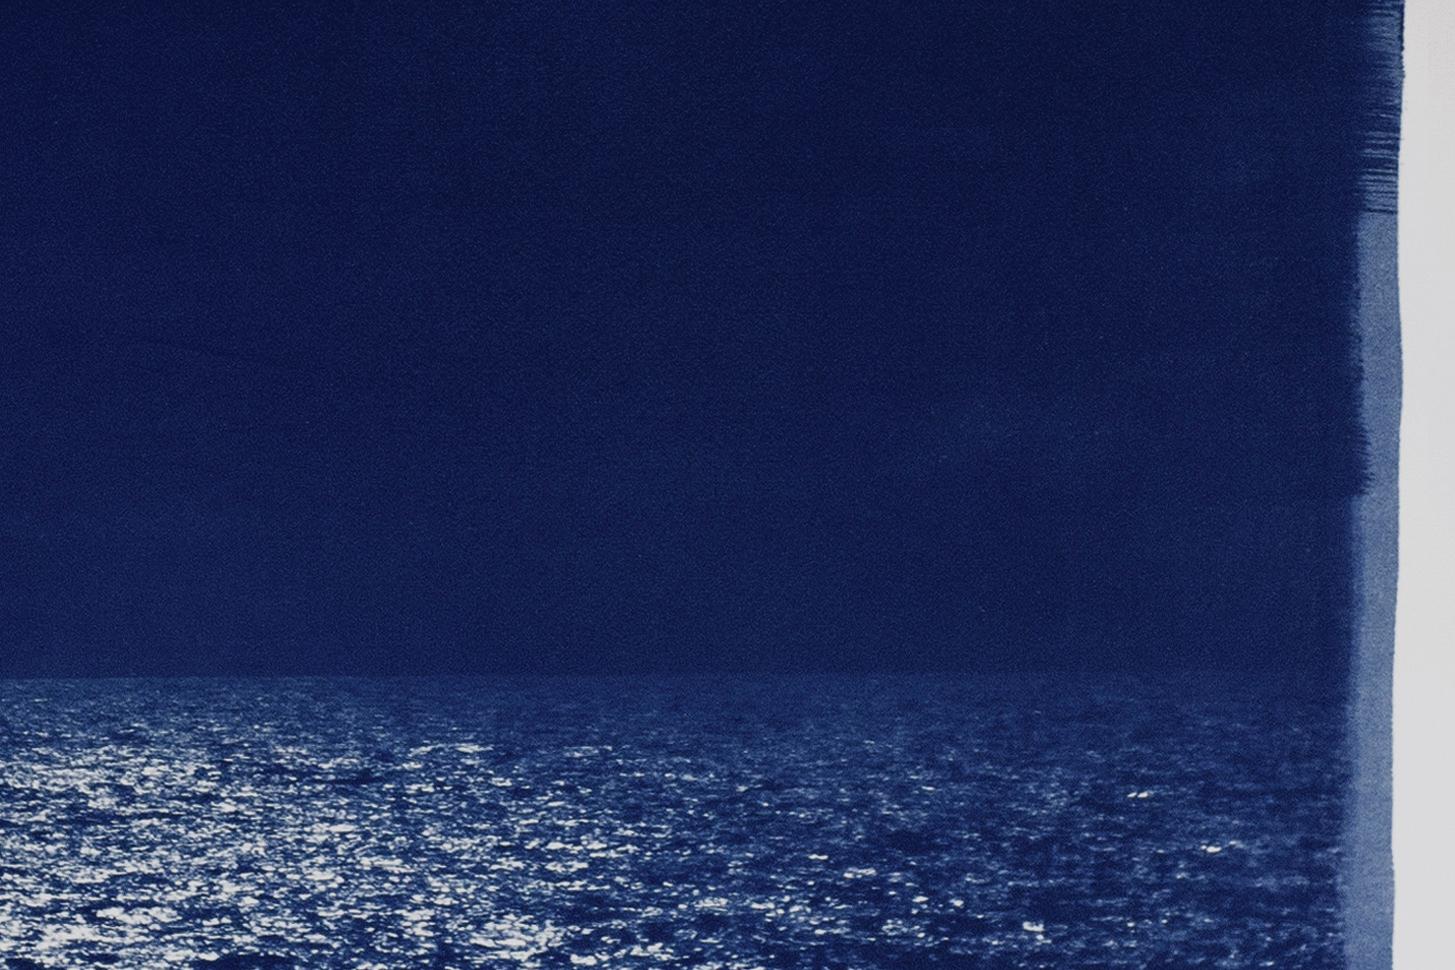 Barcelona Beach Night Horizon, Nocturnal Seascape Cyanotype on Watercolor Paper For Sale 2